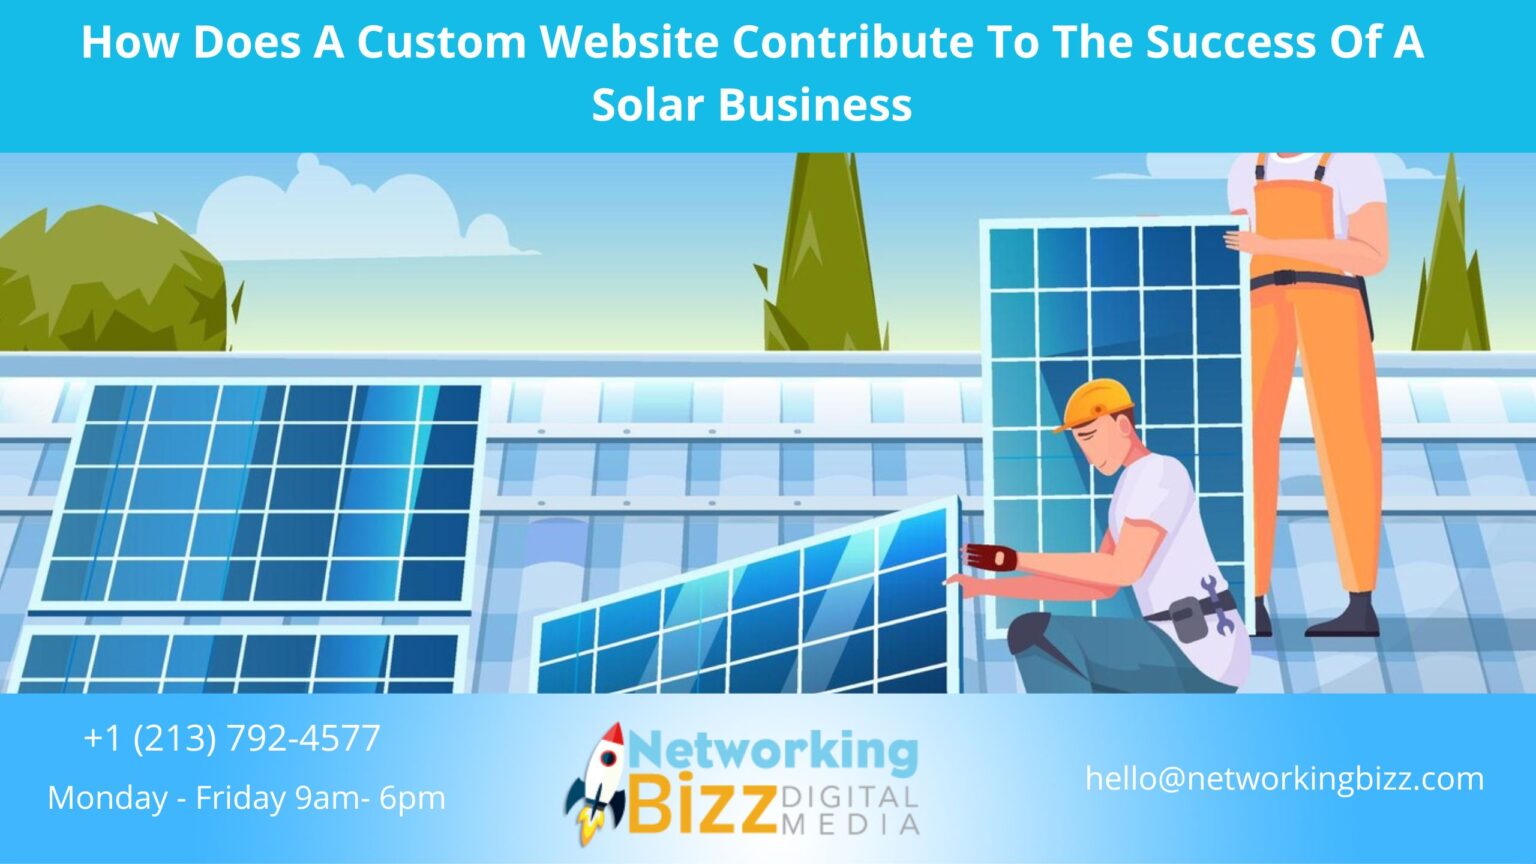 How Does A Custom Website Contribute To The Success Of A Solar Business